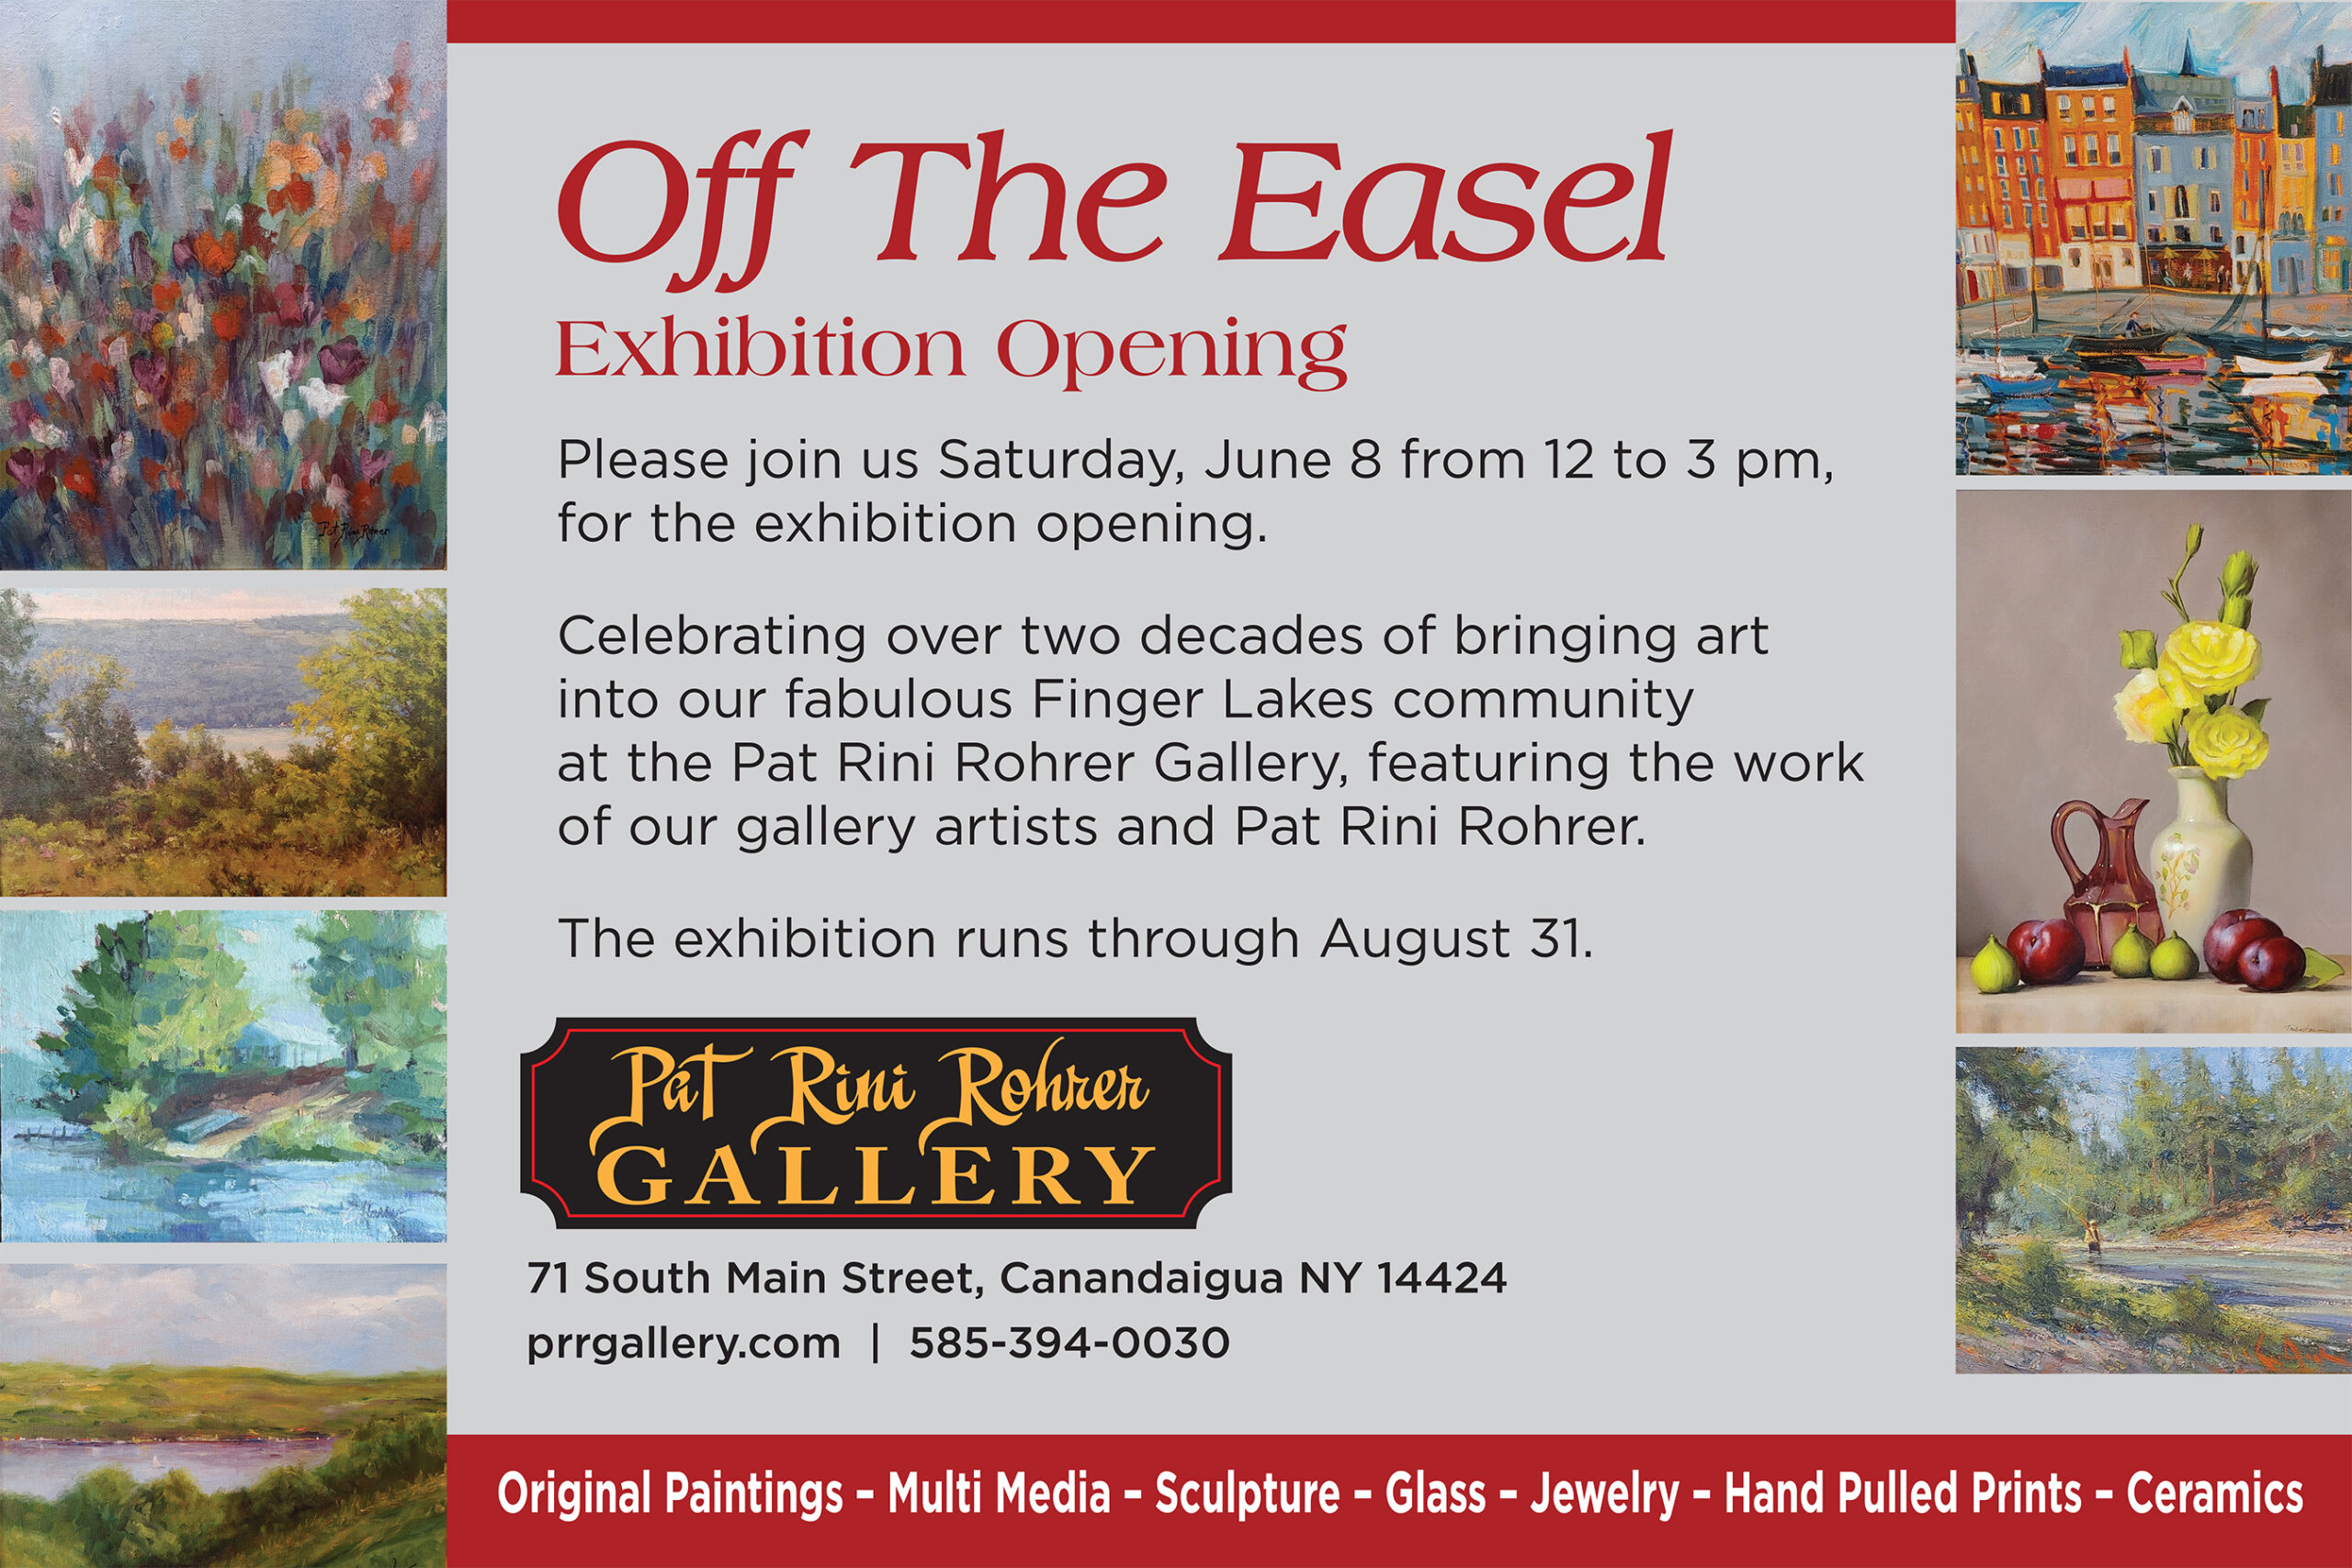 “Off The Easel” exhibition opening at the Pat Rini Rohrer Gallery